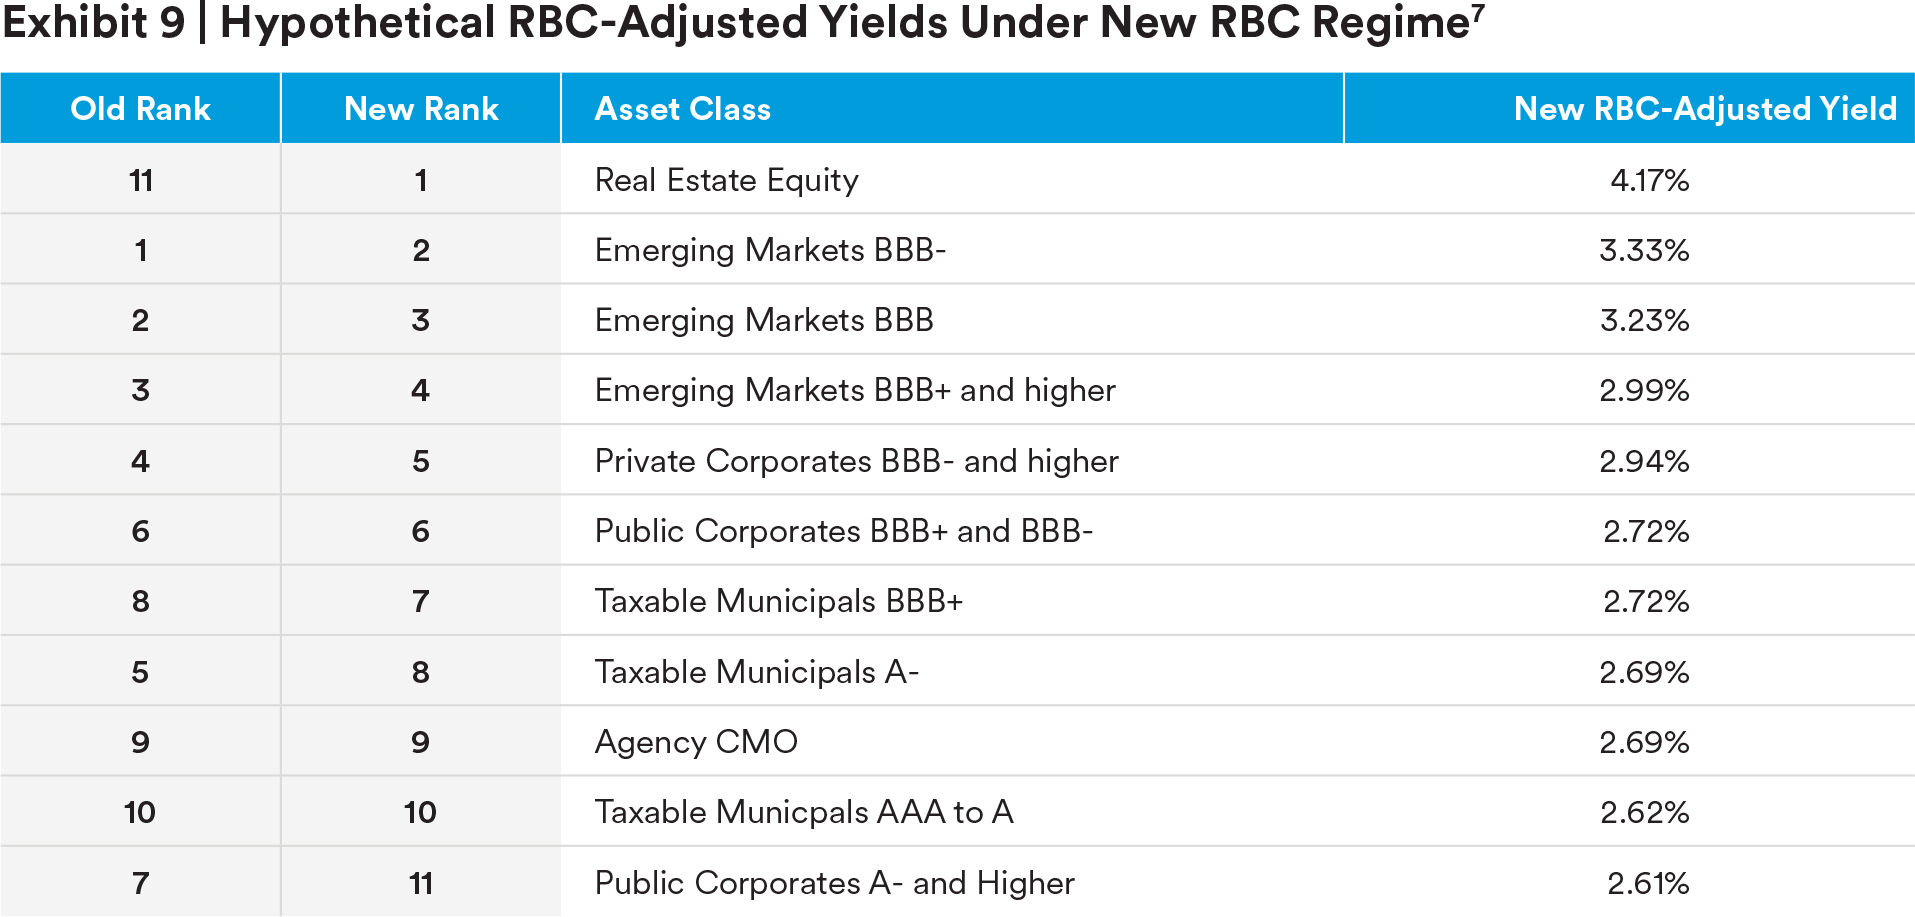 /></figure>
<!-- /wp:image -->

<!-- wp:paragraph -->
<p>Historically, most life insurance companies have allocated less than 5% of their portfolio to real estate equity.<sup>8</sup> We believe this has primarily been due to the previous RBC requirements. We expect that many insurers will increase their allocations to real estate equity in the future due to the adjusted RBC requirements.</p>
<!-- /wp:paragraph -->

<!-- wp:heading {